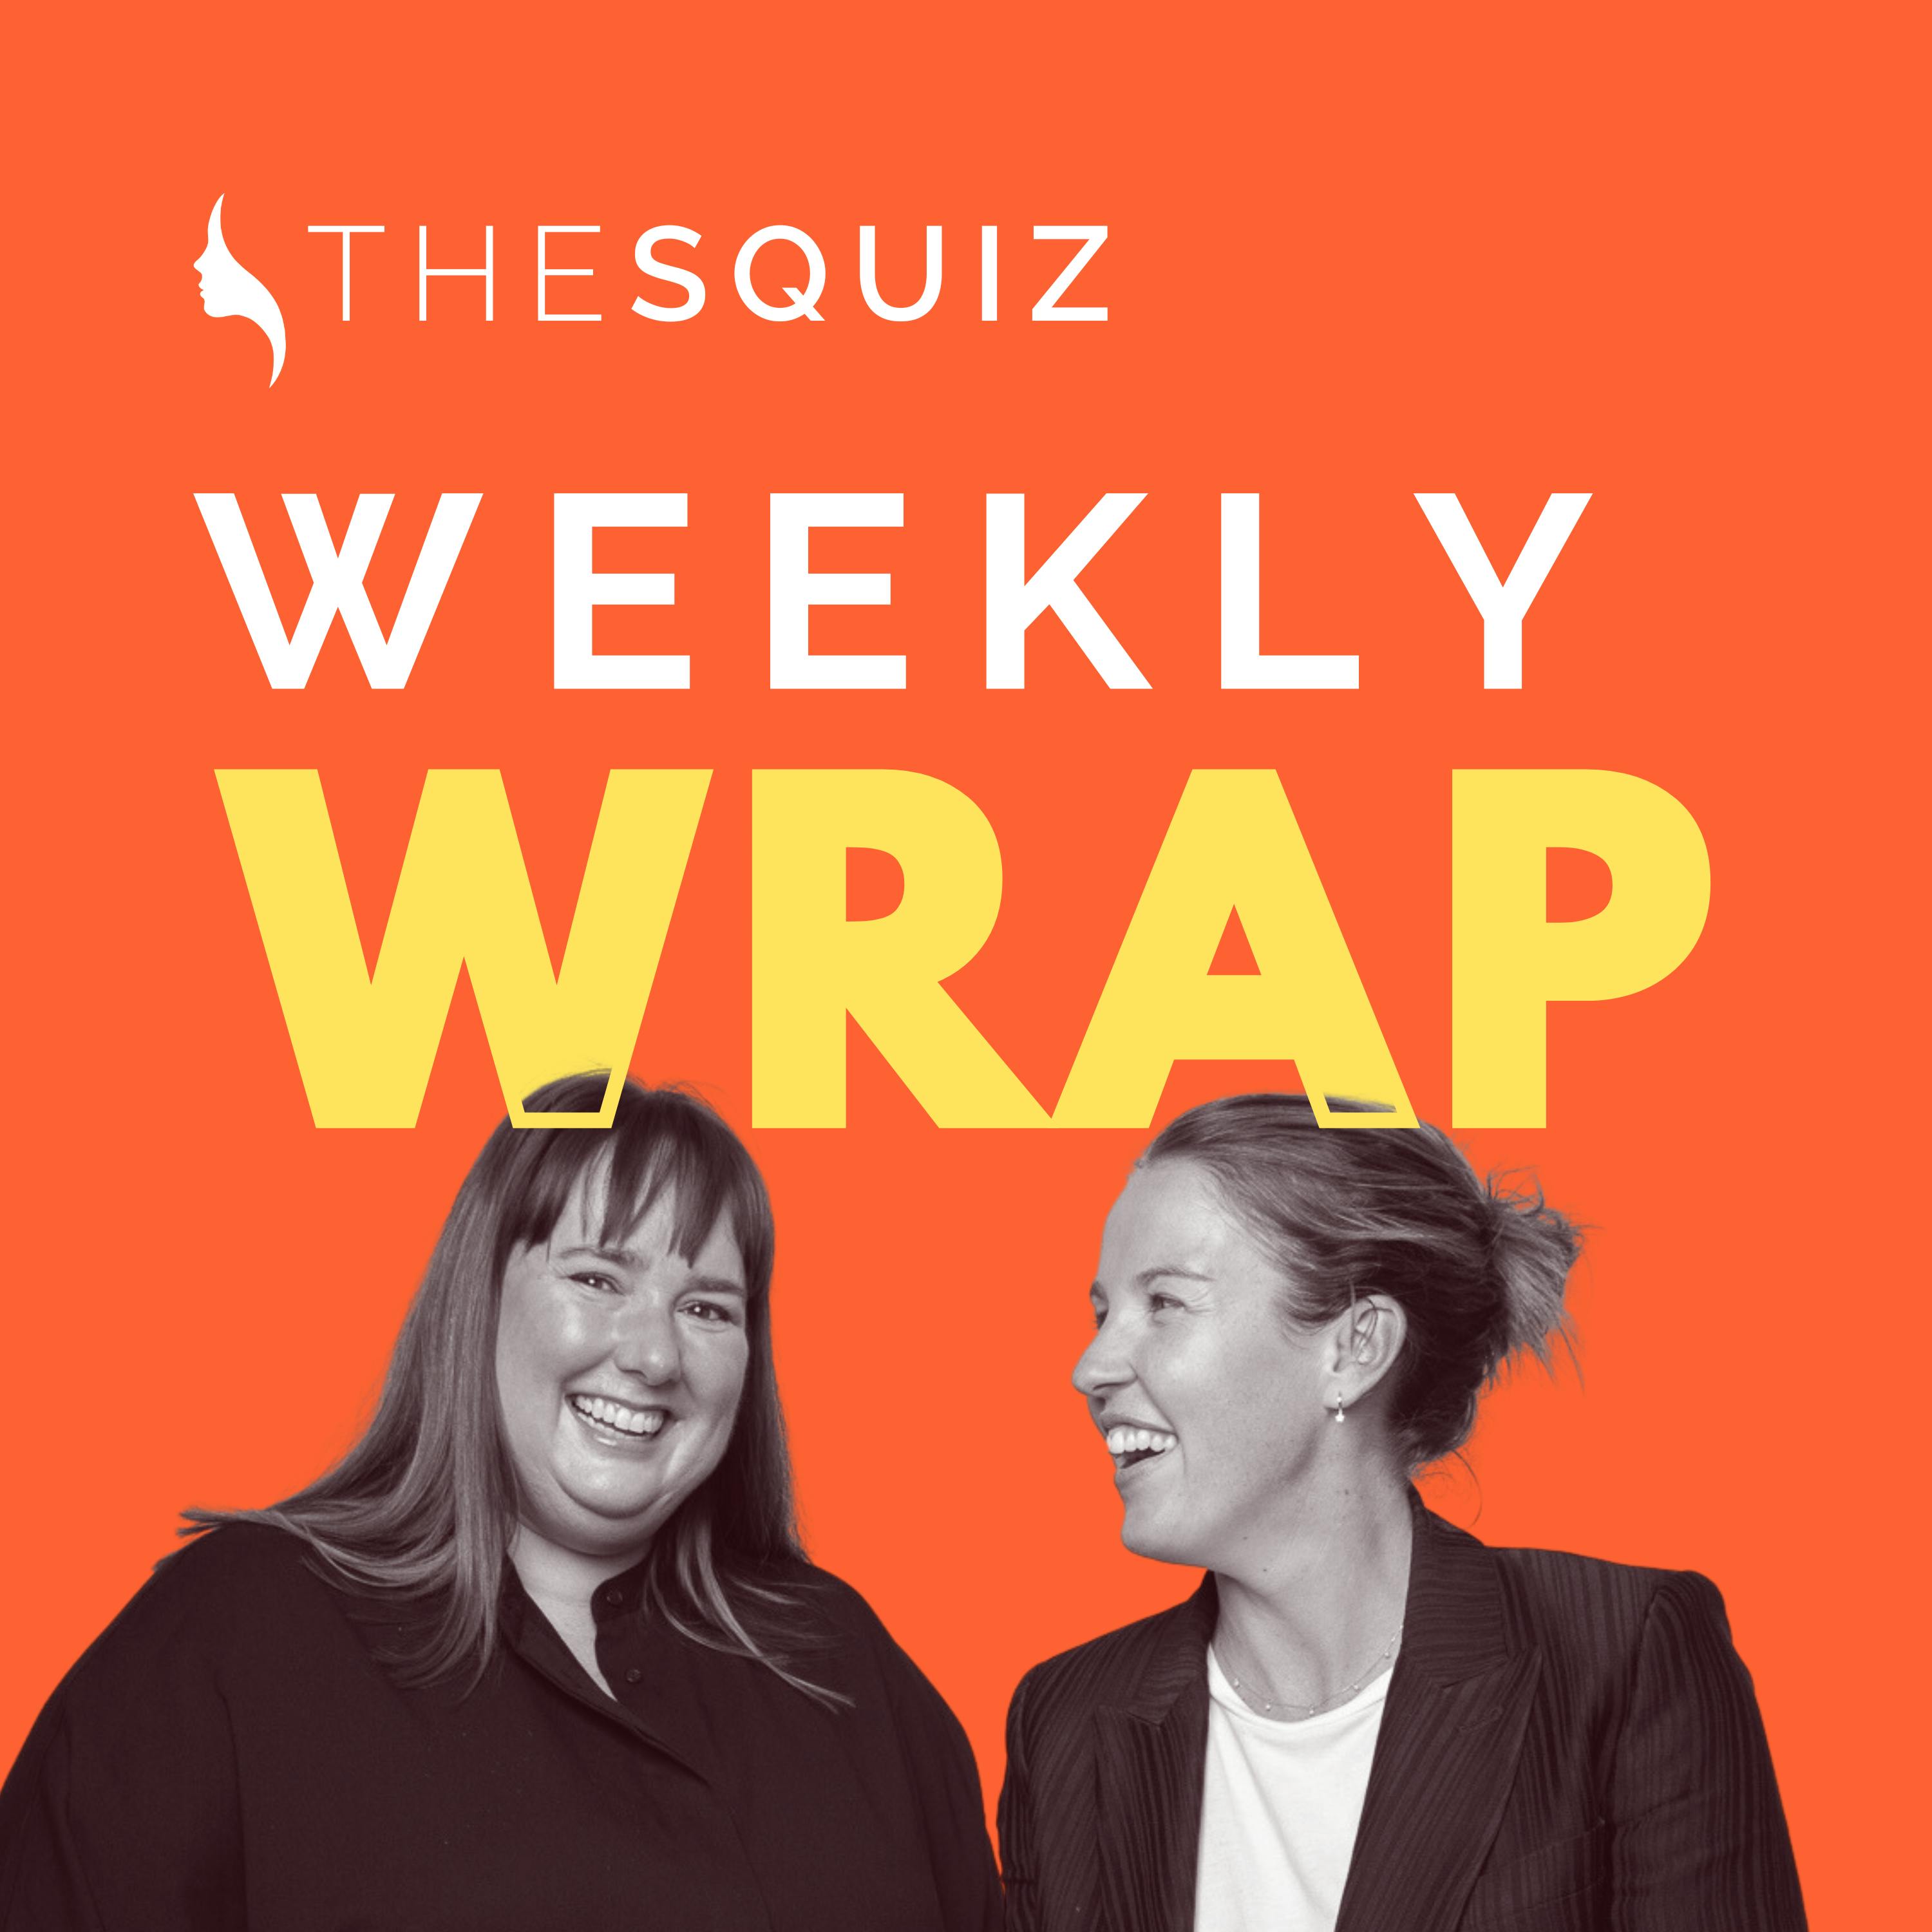 Weekly Wrap, 21 October: The fallout in Israel-Gaza, unpacking the Voice referendum results, and some top linen tips...